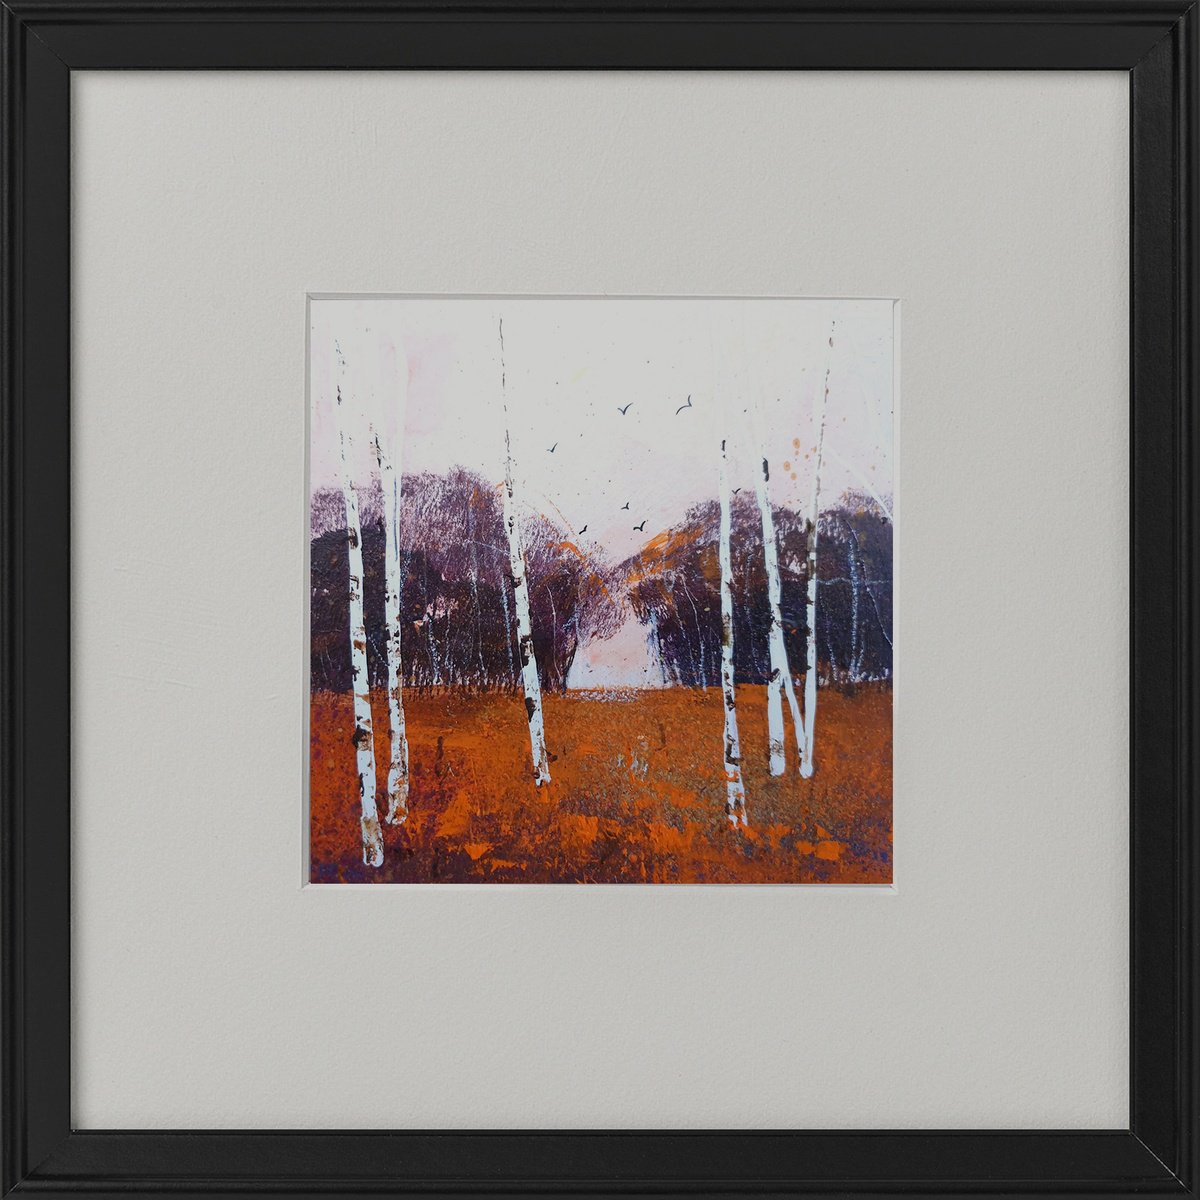 Seasons - Autumn Birches Coppice framed by Teresa Tanner